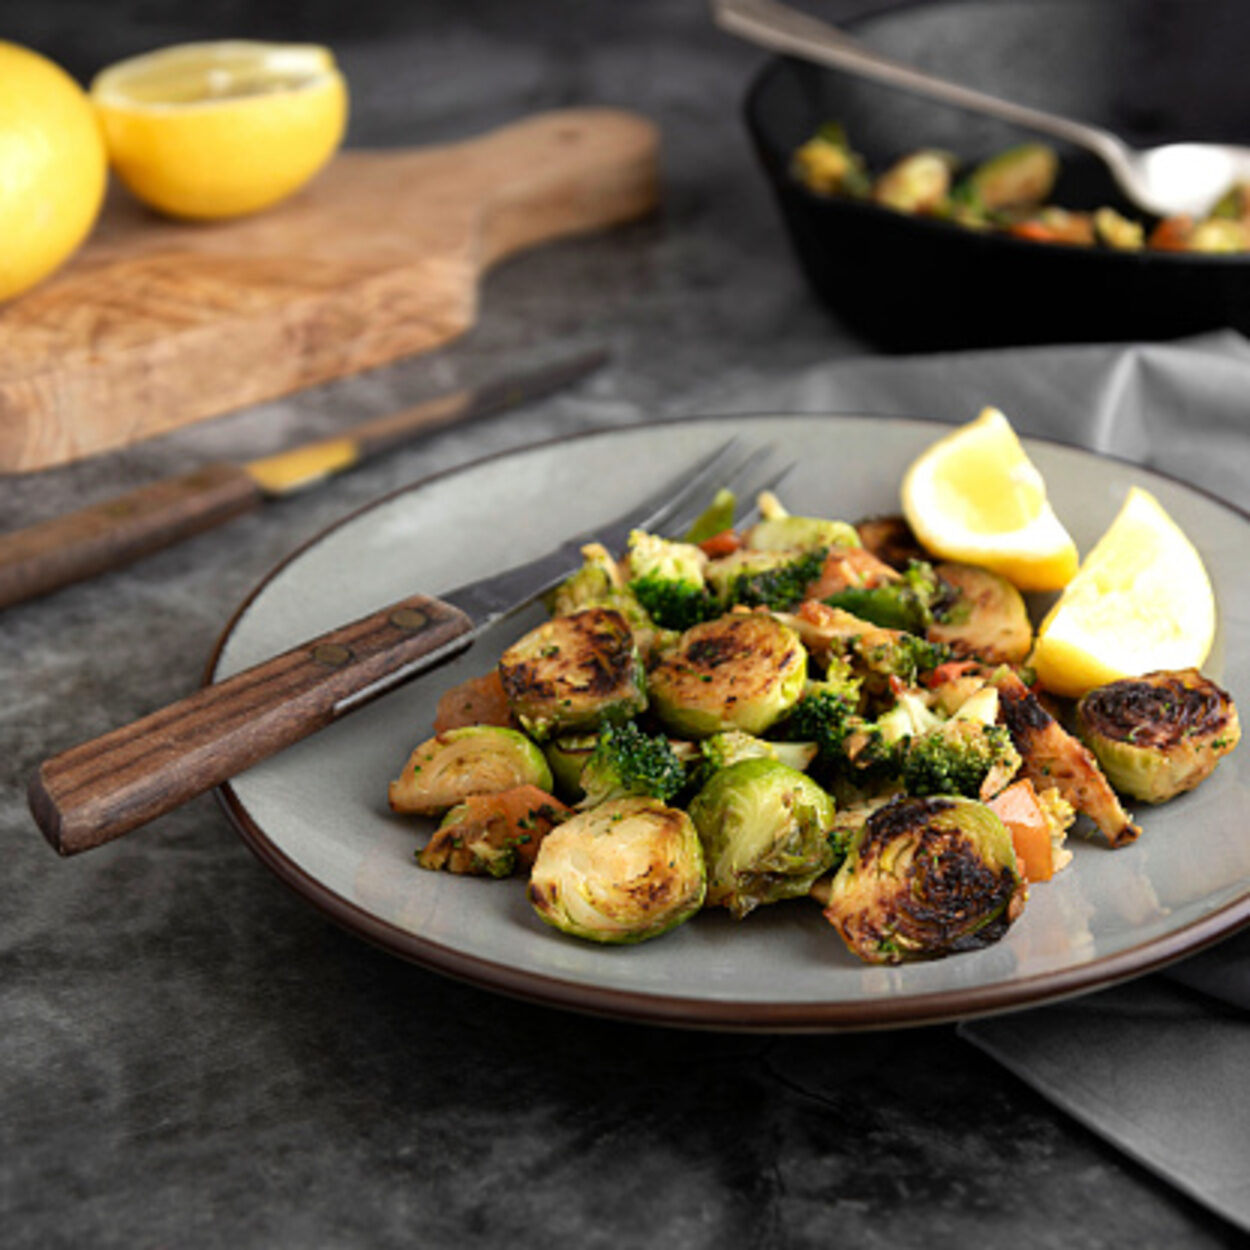 Brussel sprouts with mashed potatoes